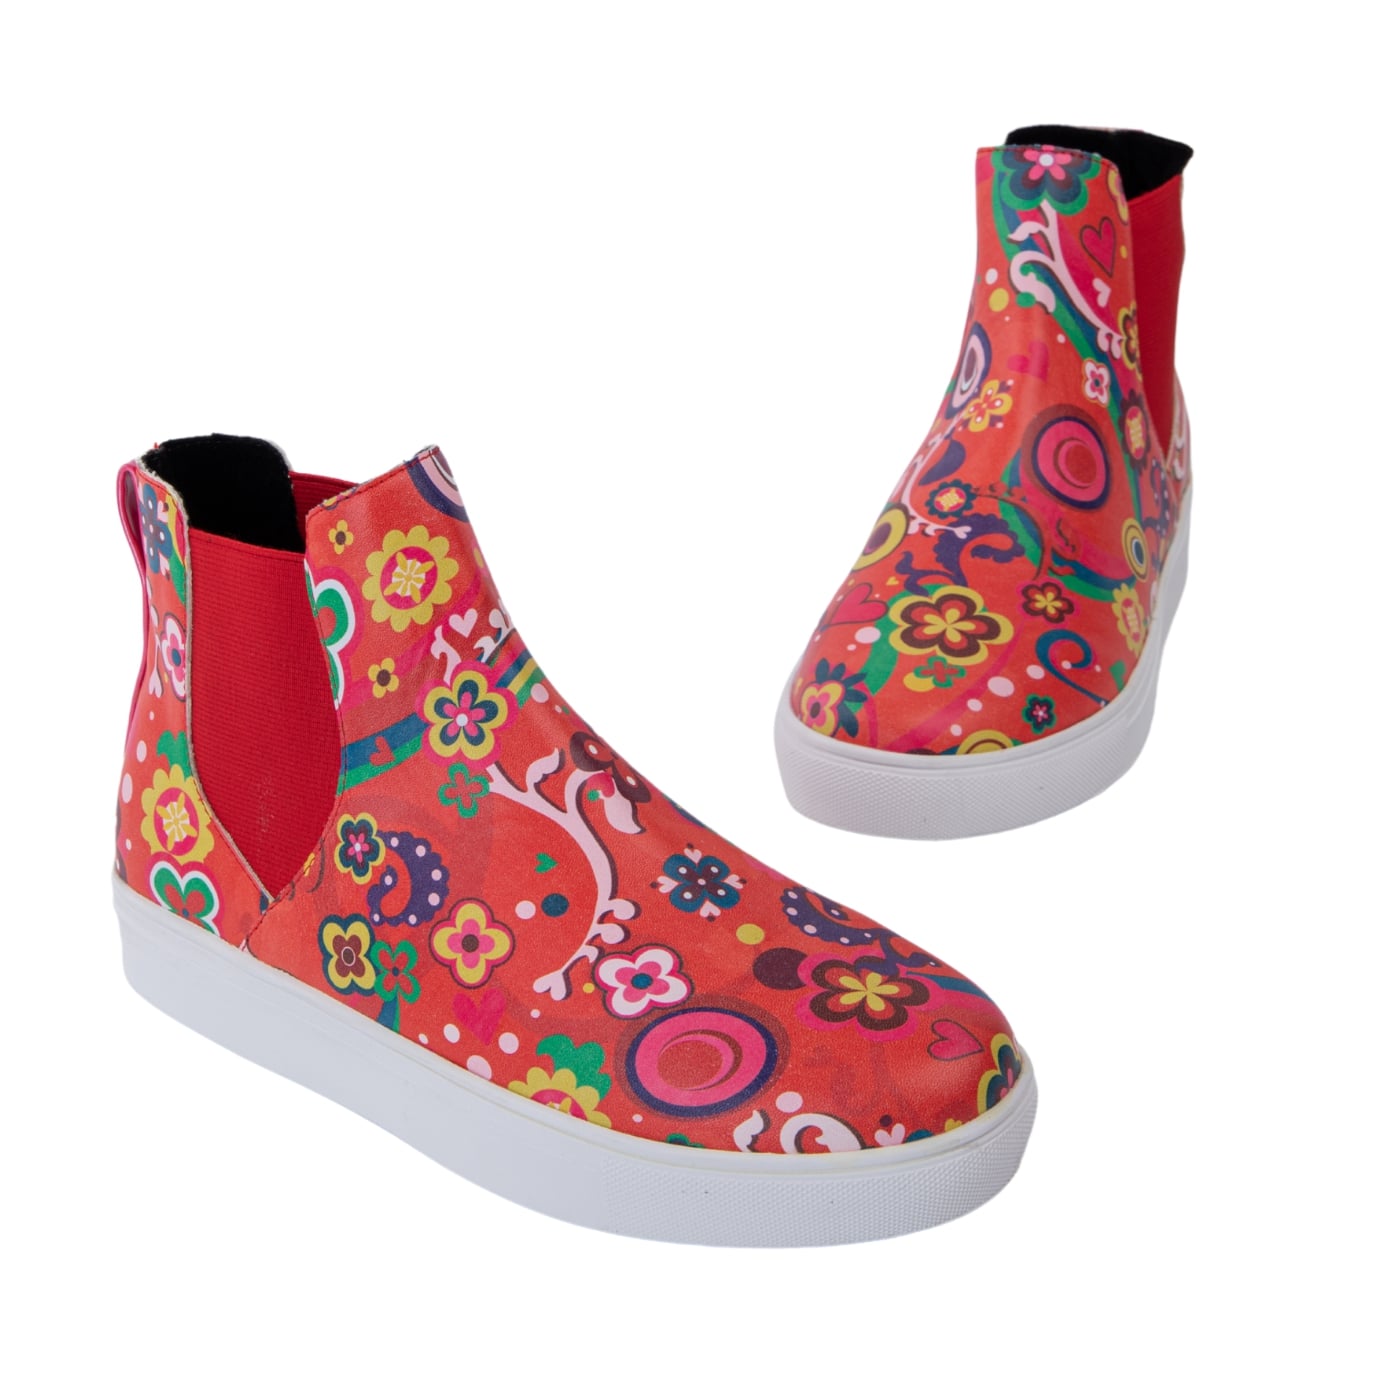 Groovy Remix Hi Tops by RainbowsAndFairies.com.au (Psychedelic - Chelsea Boots - Woodstock - Hippy - Vibrant - Mismatched Shoes - Elastic Side Boots) - SKU: FW_HITOP_GROOV_REM - Pic-01